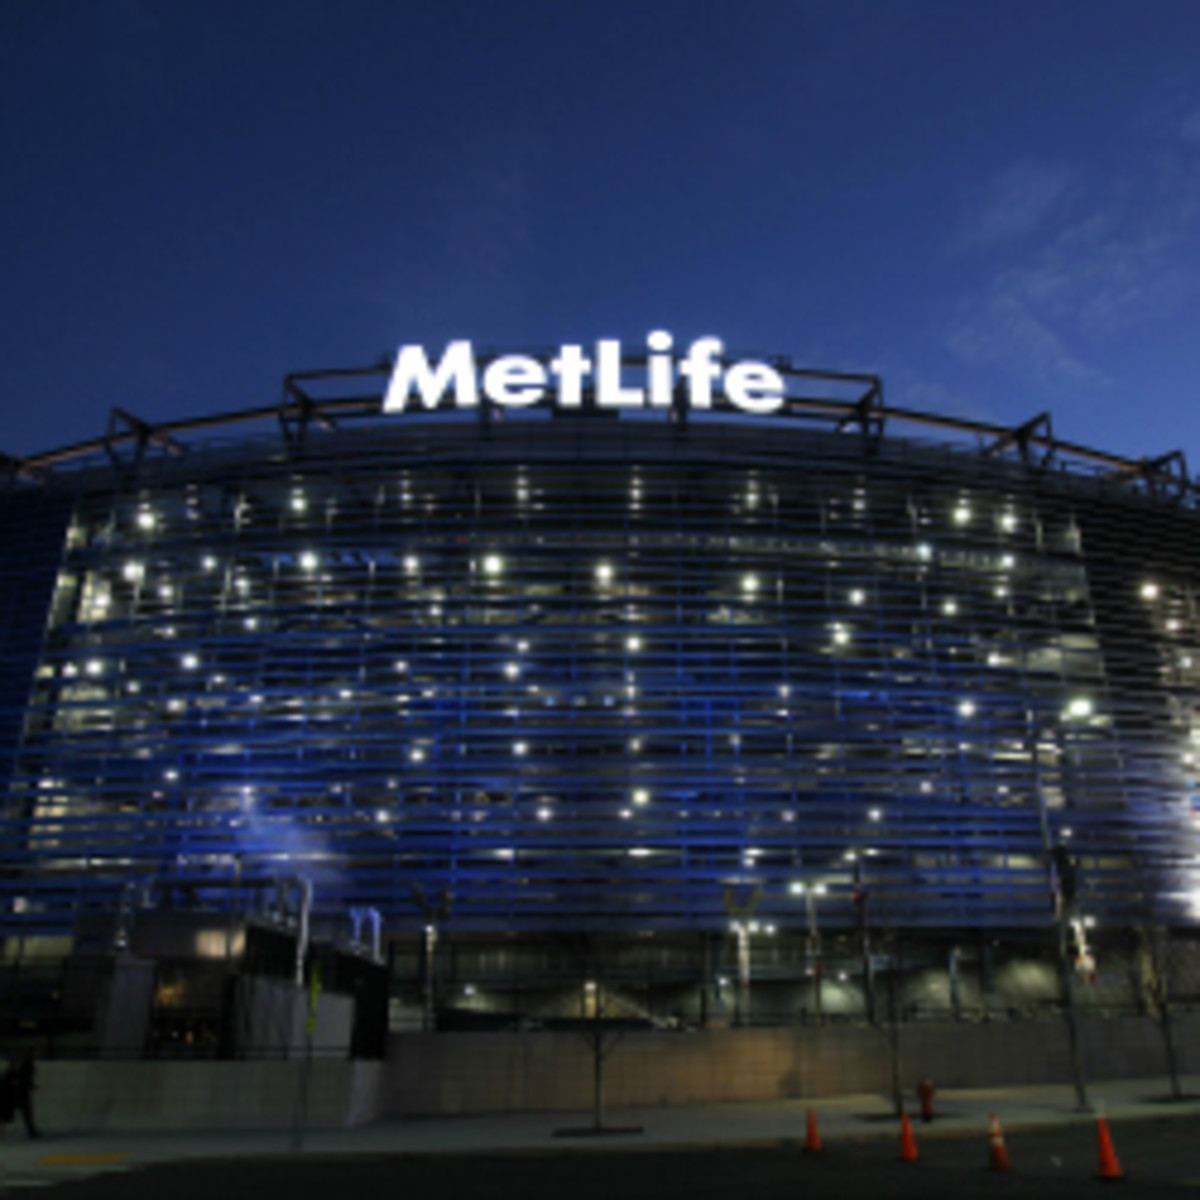 Concerns have been raised about the halftime show at MetLife Stadium for Super Bowl XLVIII due to the weather. (Rich Schultz/Getty Images)